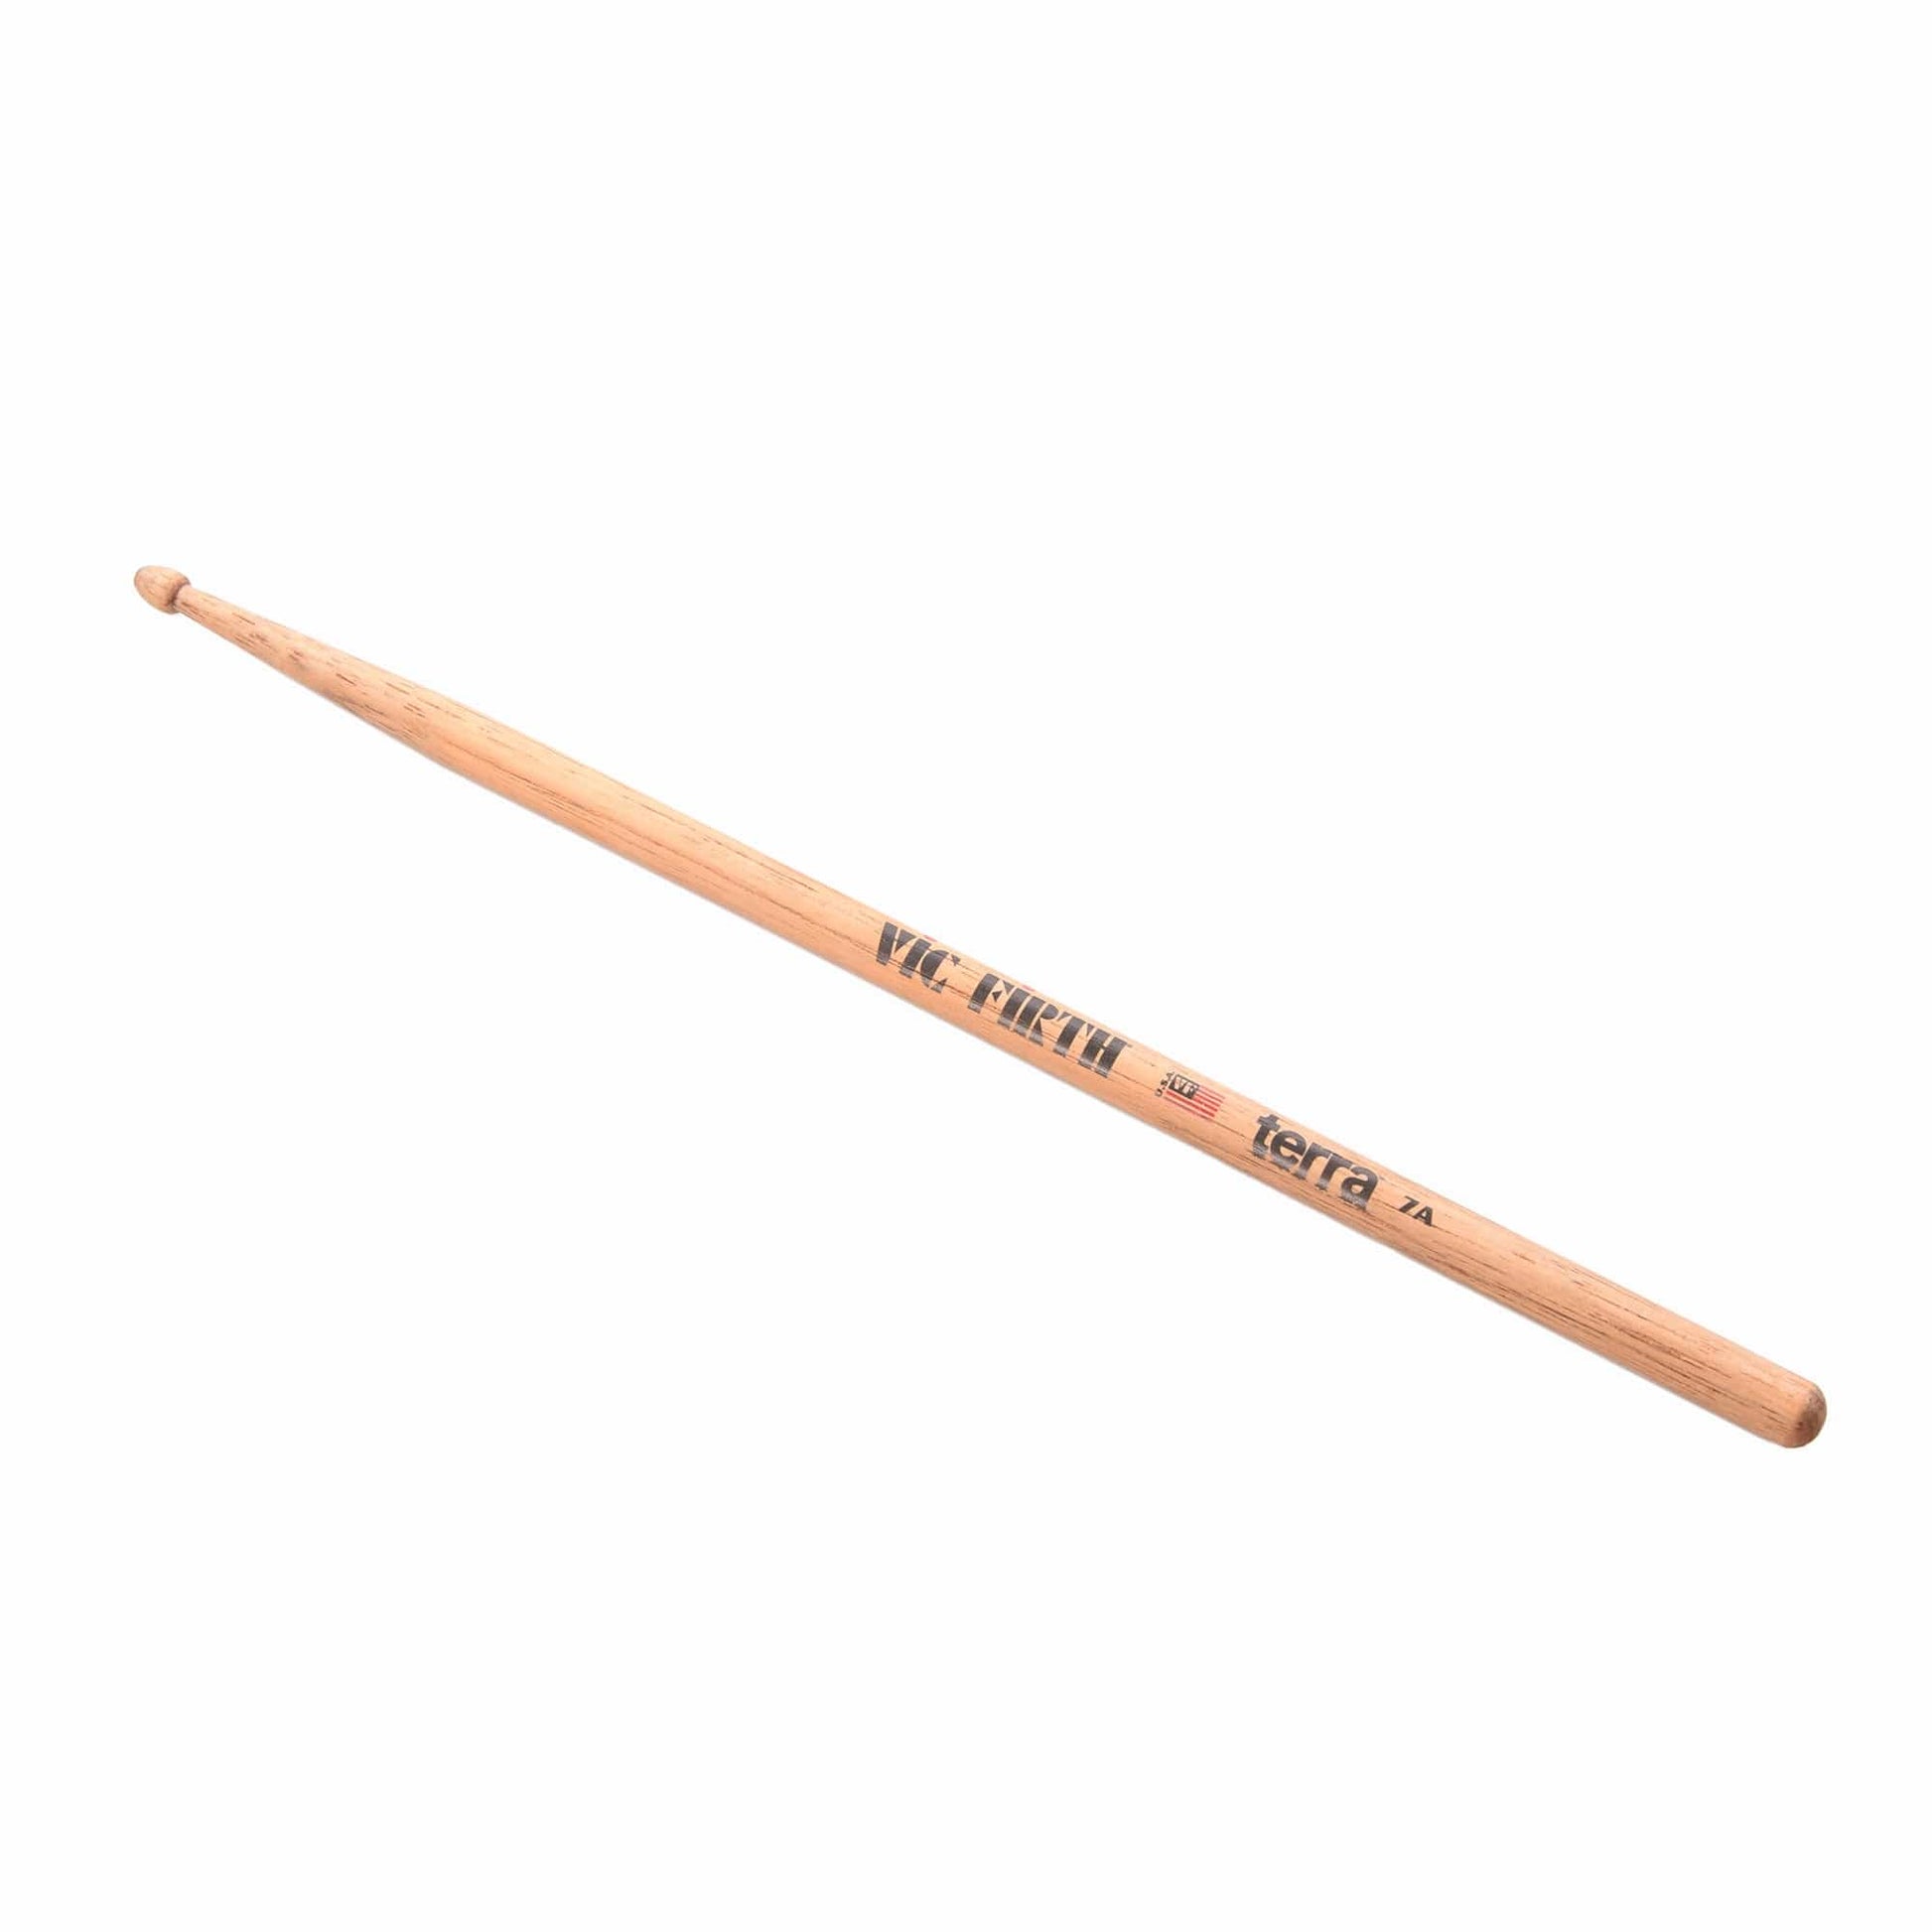 Vic Firth American Classic 7ATN Nylon Tip Drum Sticks (3 Pair Bundle + 1 Free) Drums and Percussion / Parts and Accessories / Drum Sticks and Mallets